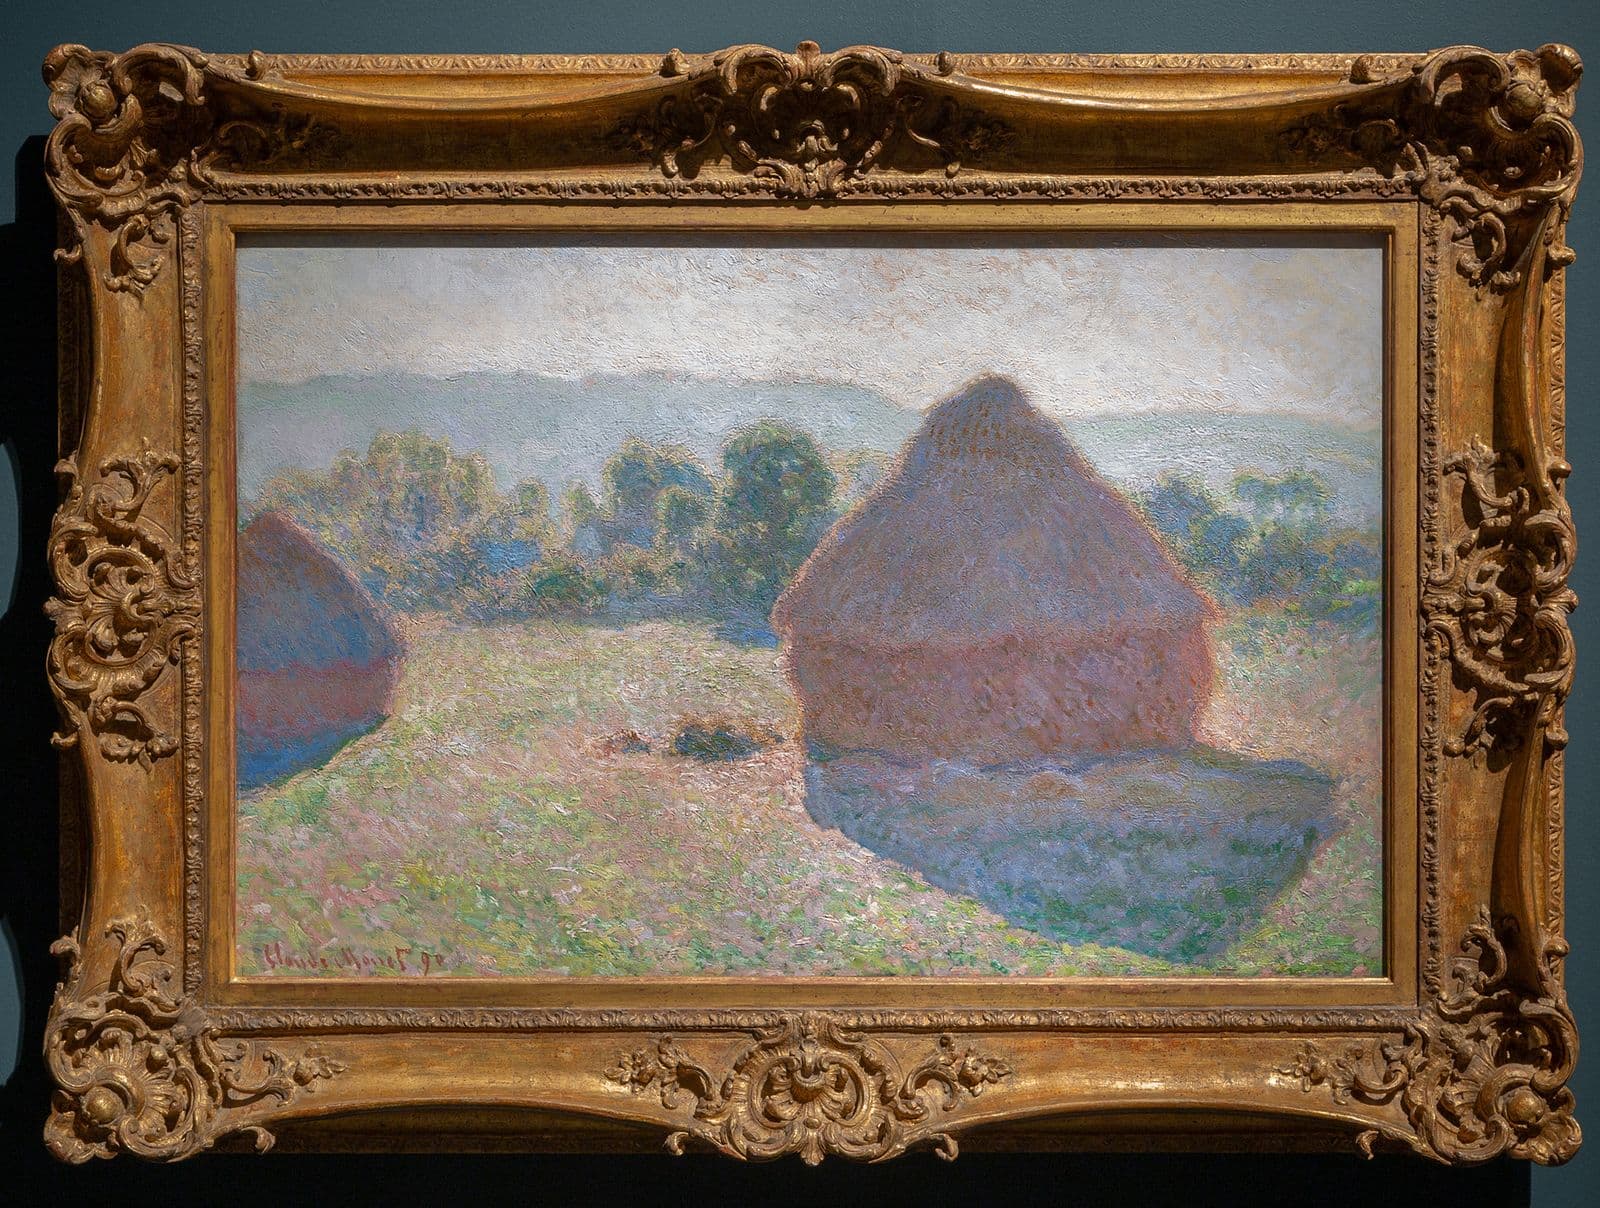 A gold frame holds a painting of haystacks